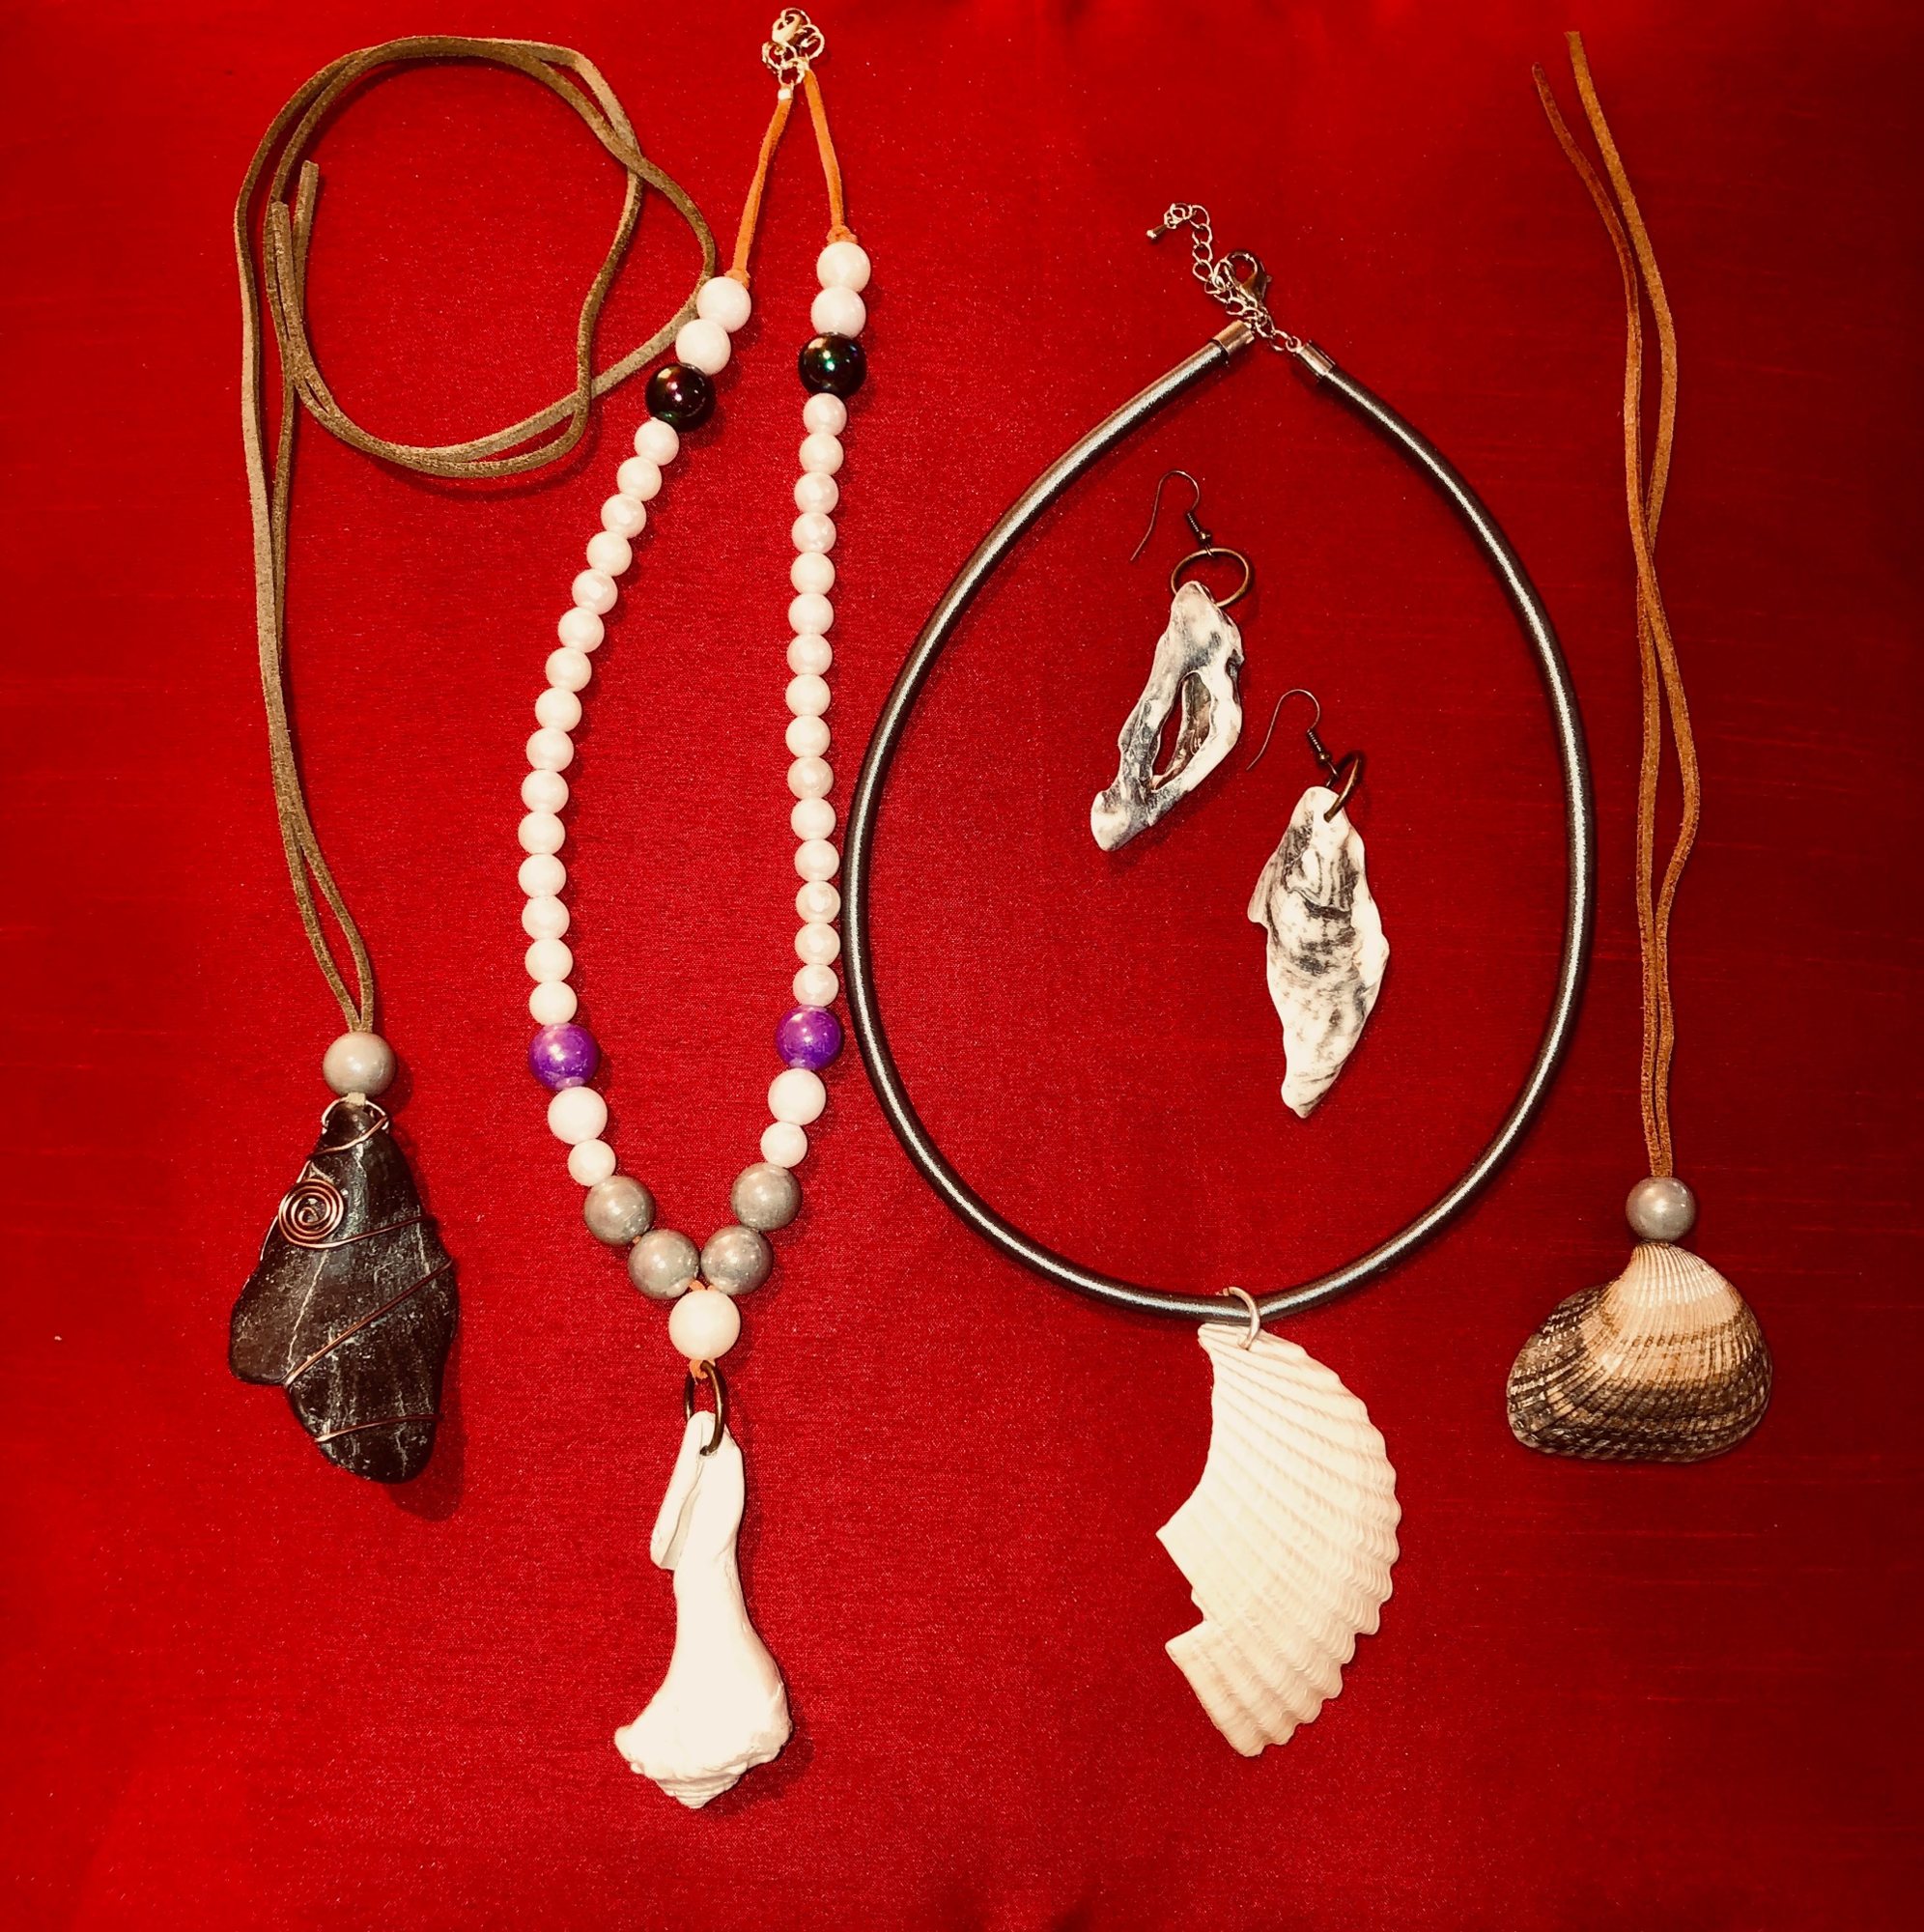 Steven Reid, who recently moved to Palm Coast, makes jewelry out of shells. Courtesy photo